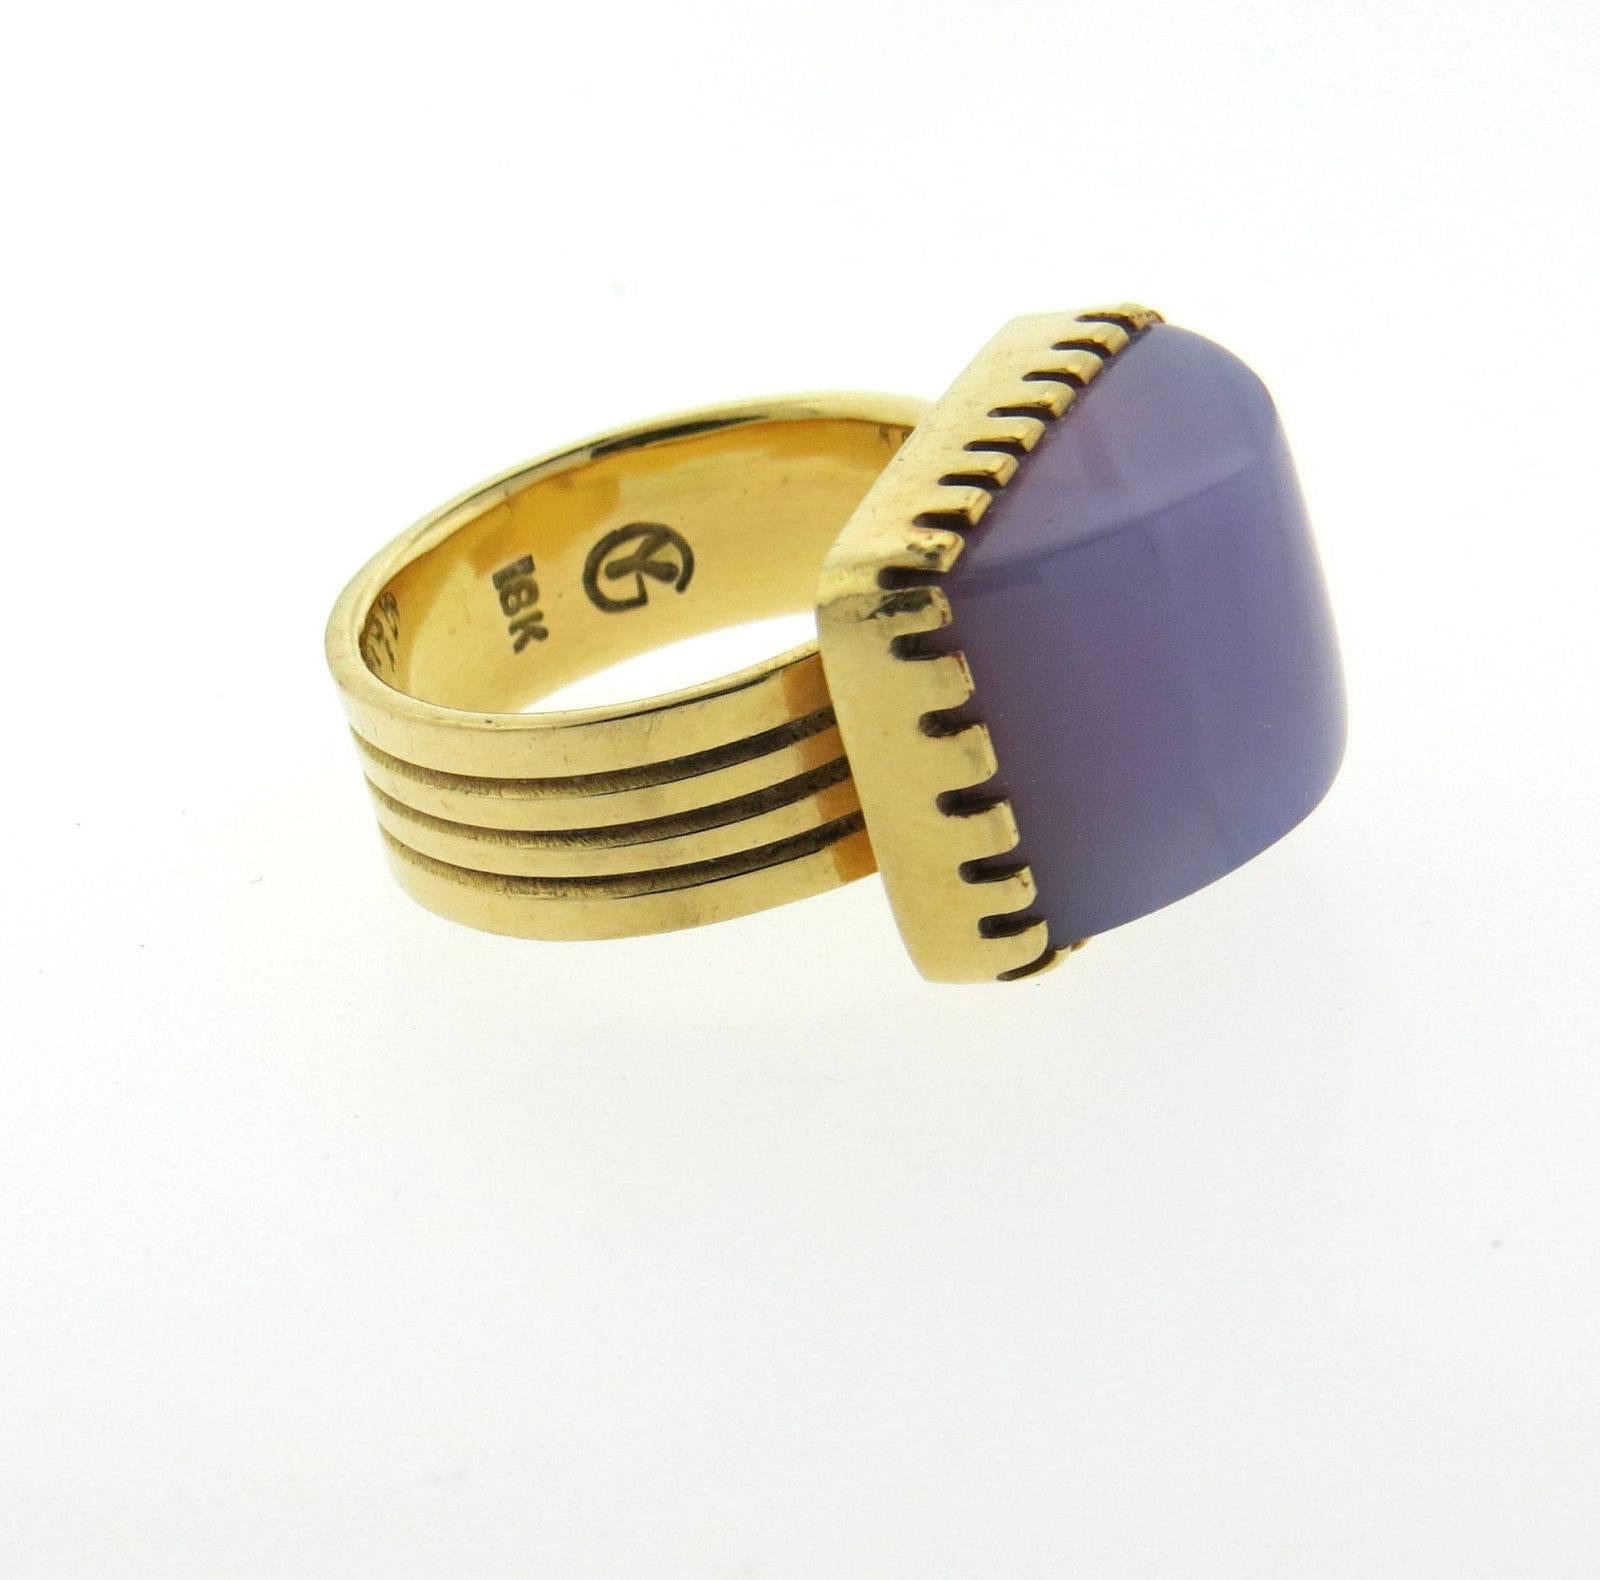 An 18k yellow gold ring set with chalcedony.  The ring is a size 7 3/4, ring top is 14mm x 18mm.  Marked: Maker's mark GY and 18k.  The weight of the ring is 13.5 grams.